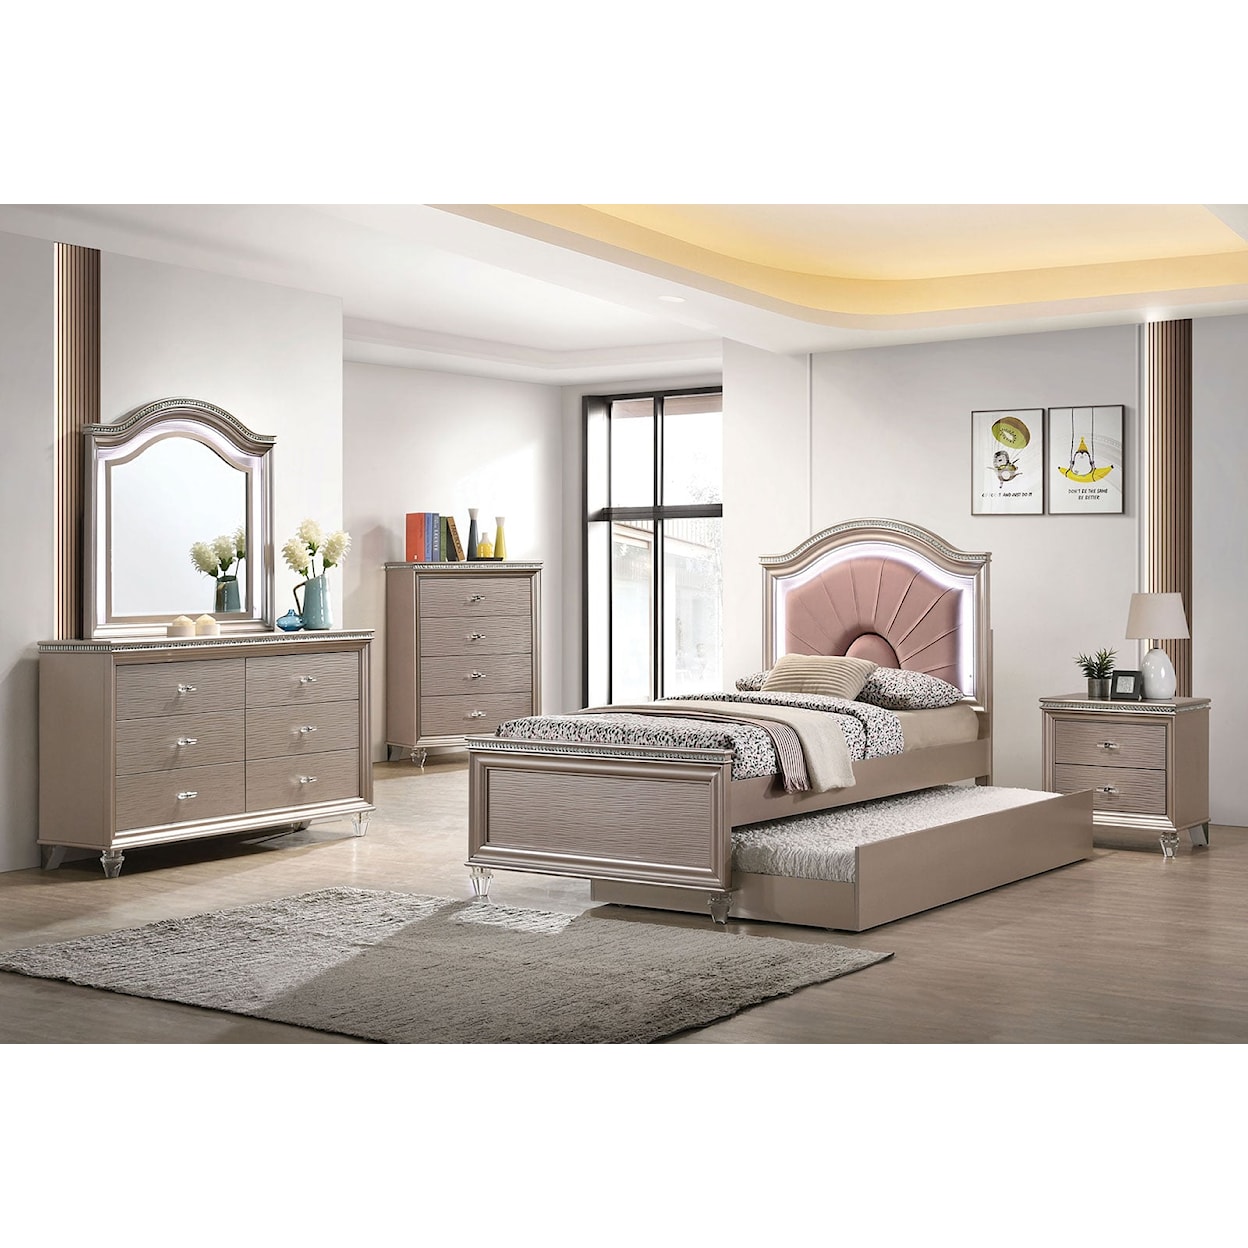 Furniture of America Allie 4-Piece Twin Bedroom Set with Trundle